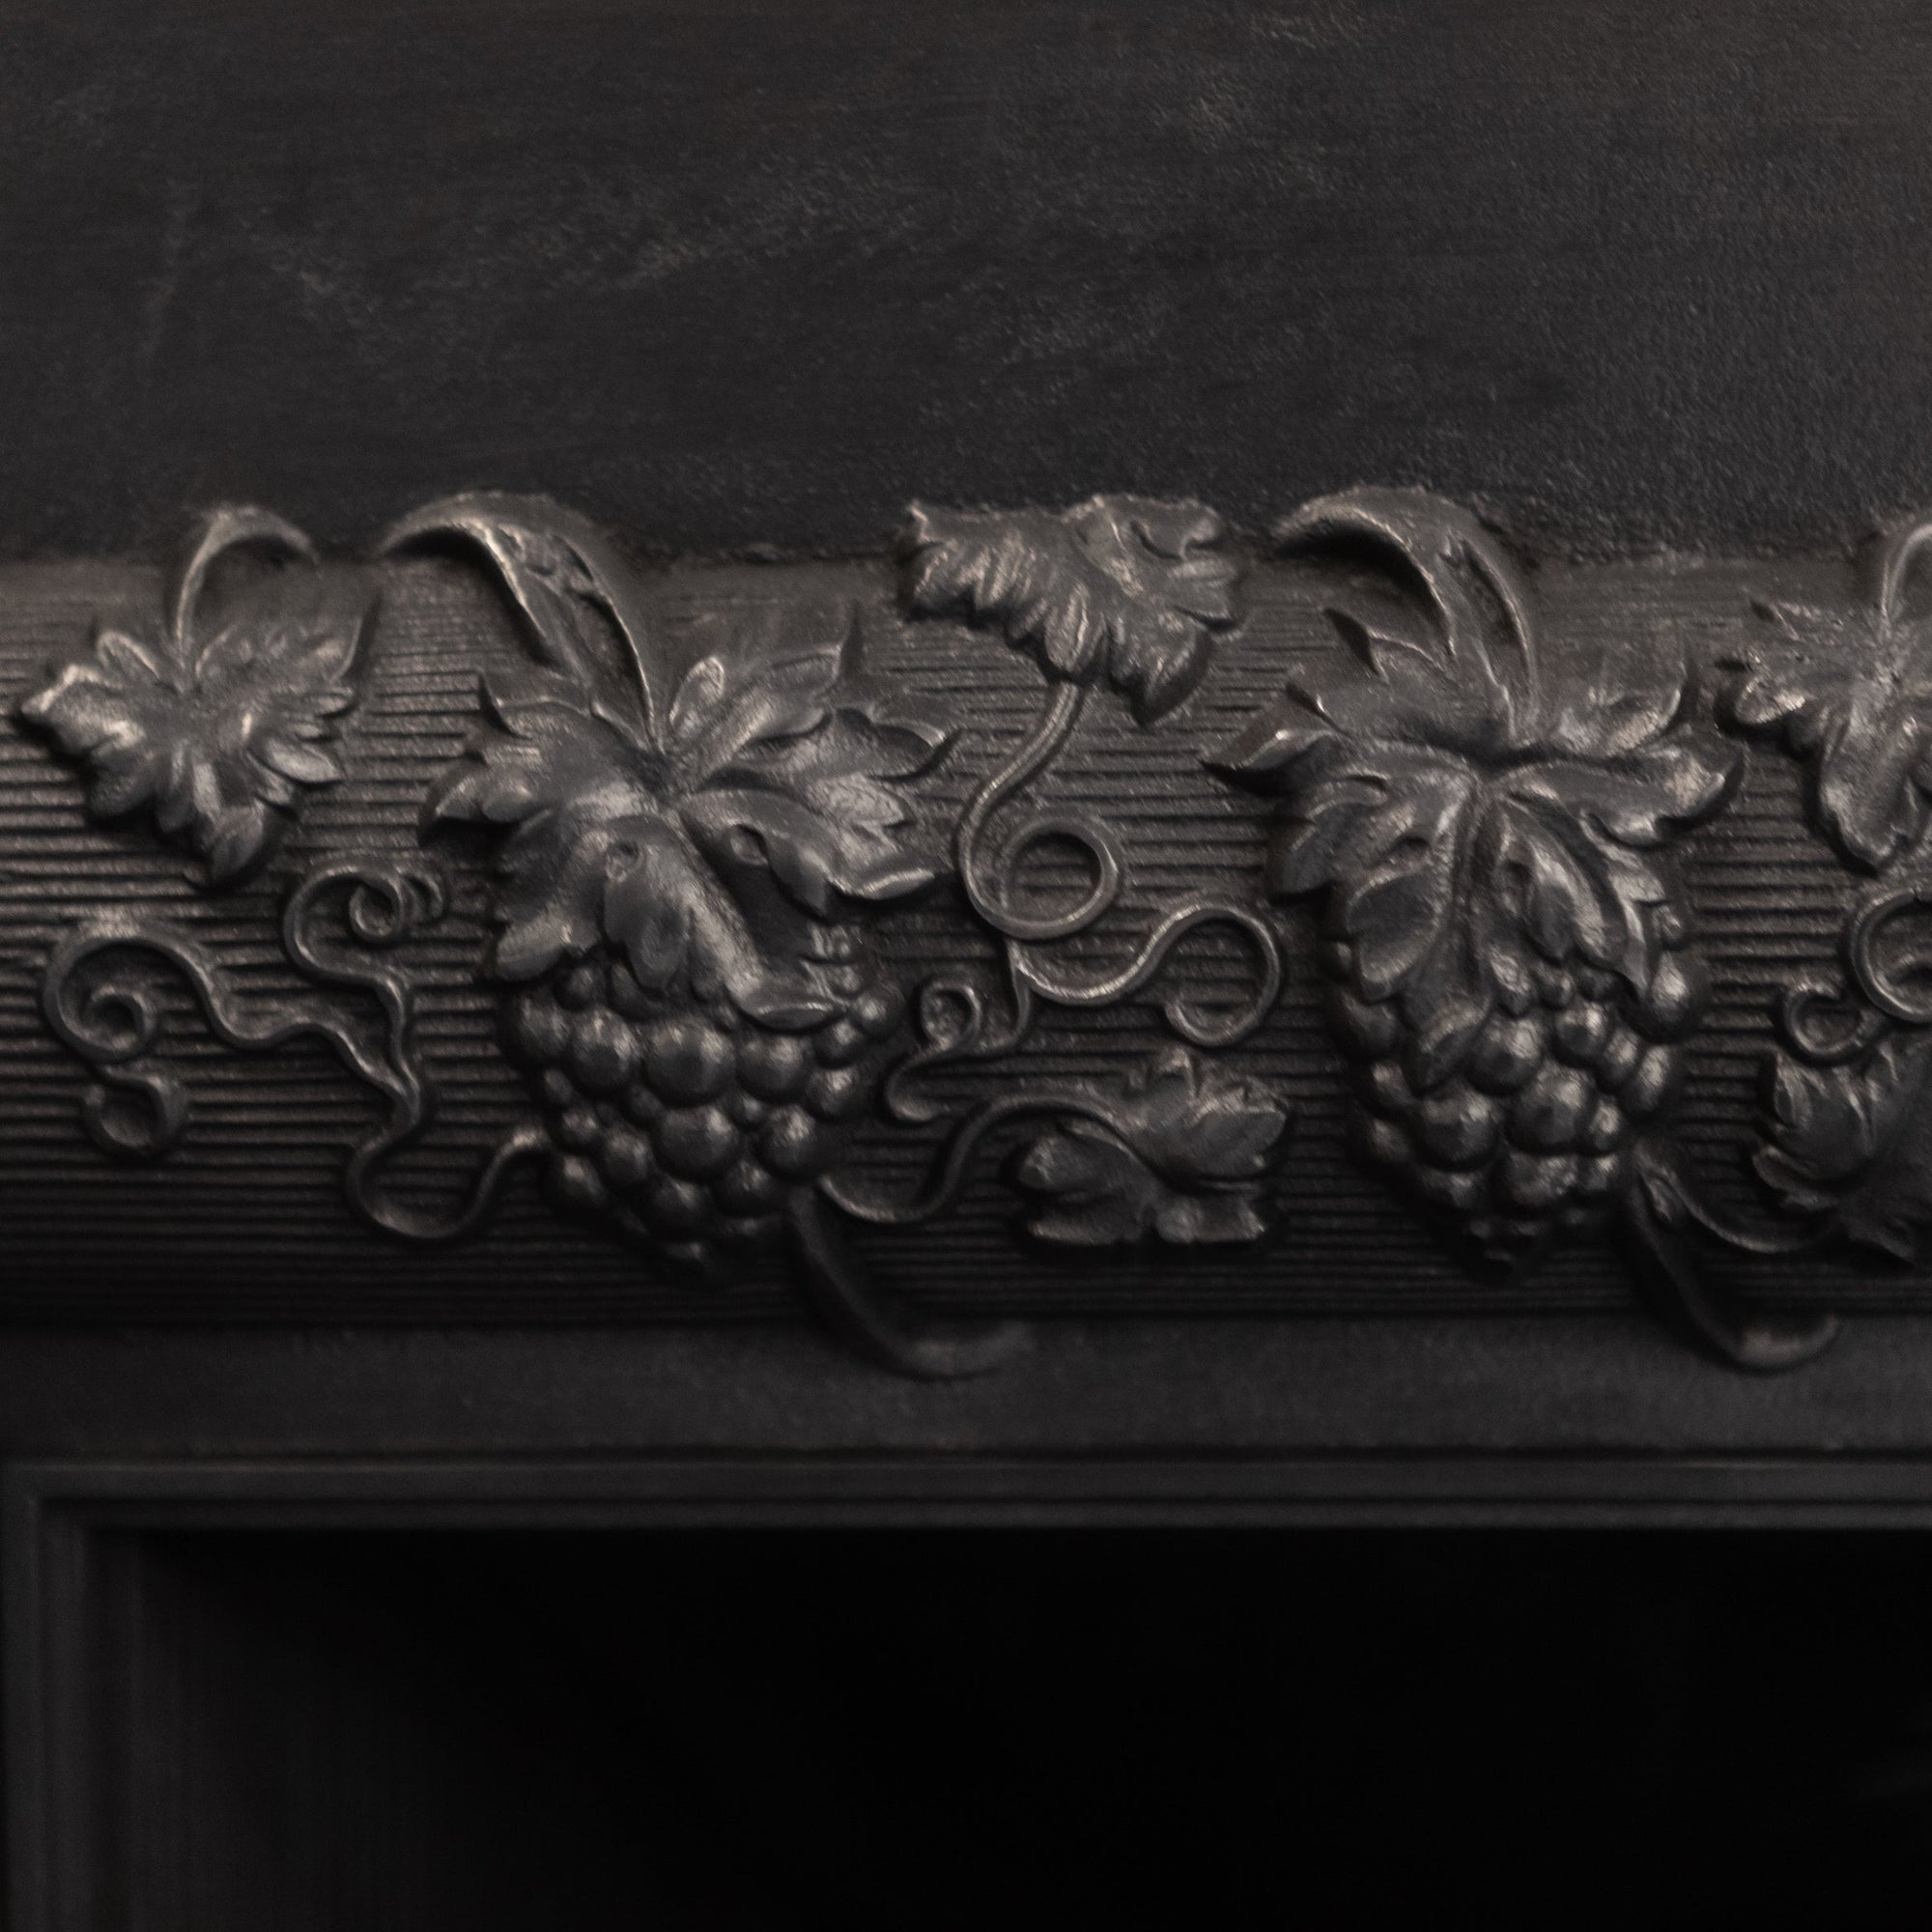 Reclaimed Ornate Georgian Style Cast Iron Fireplace Insert | The Architectural Forum